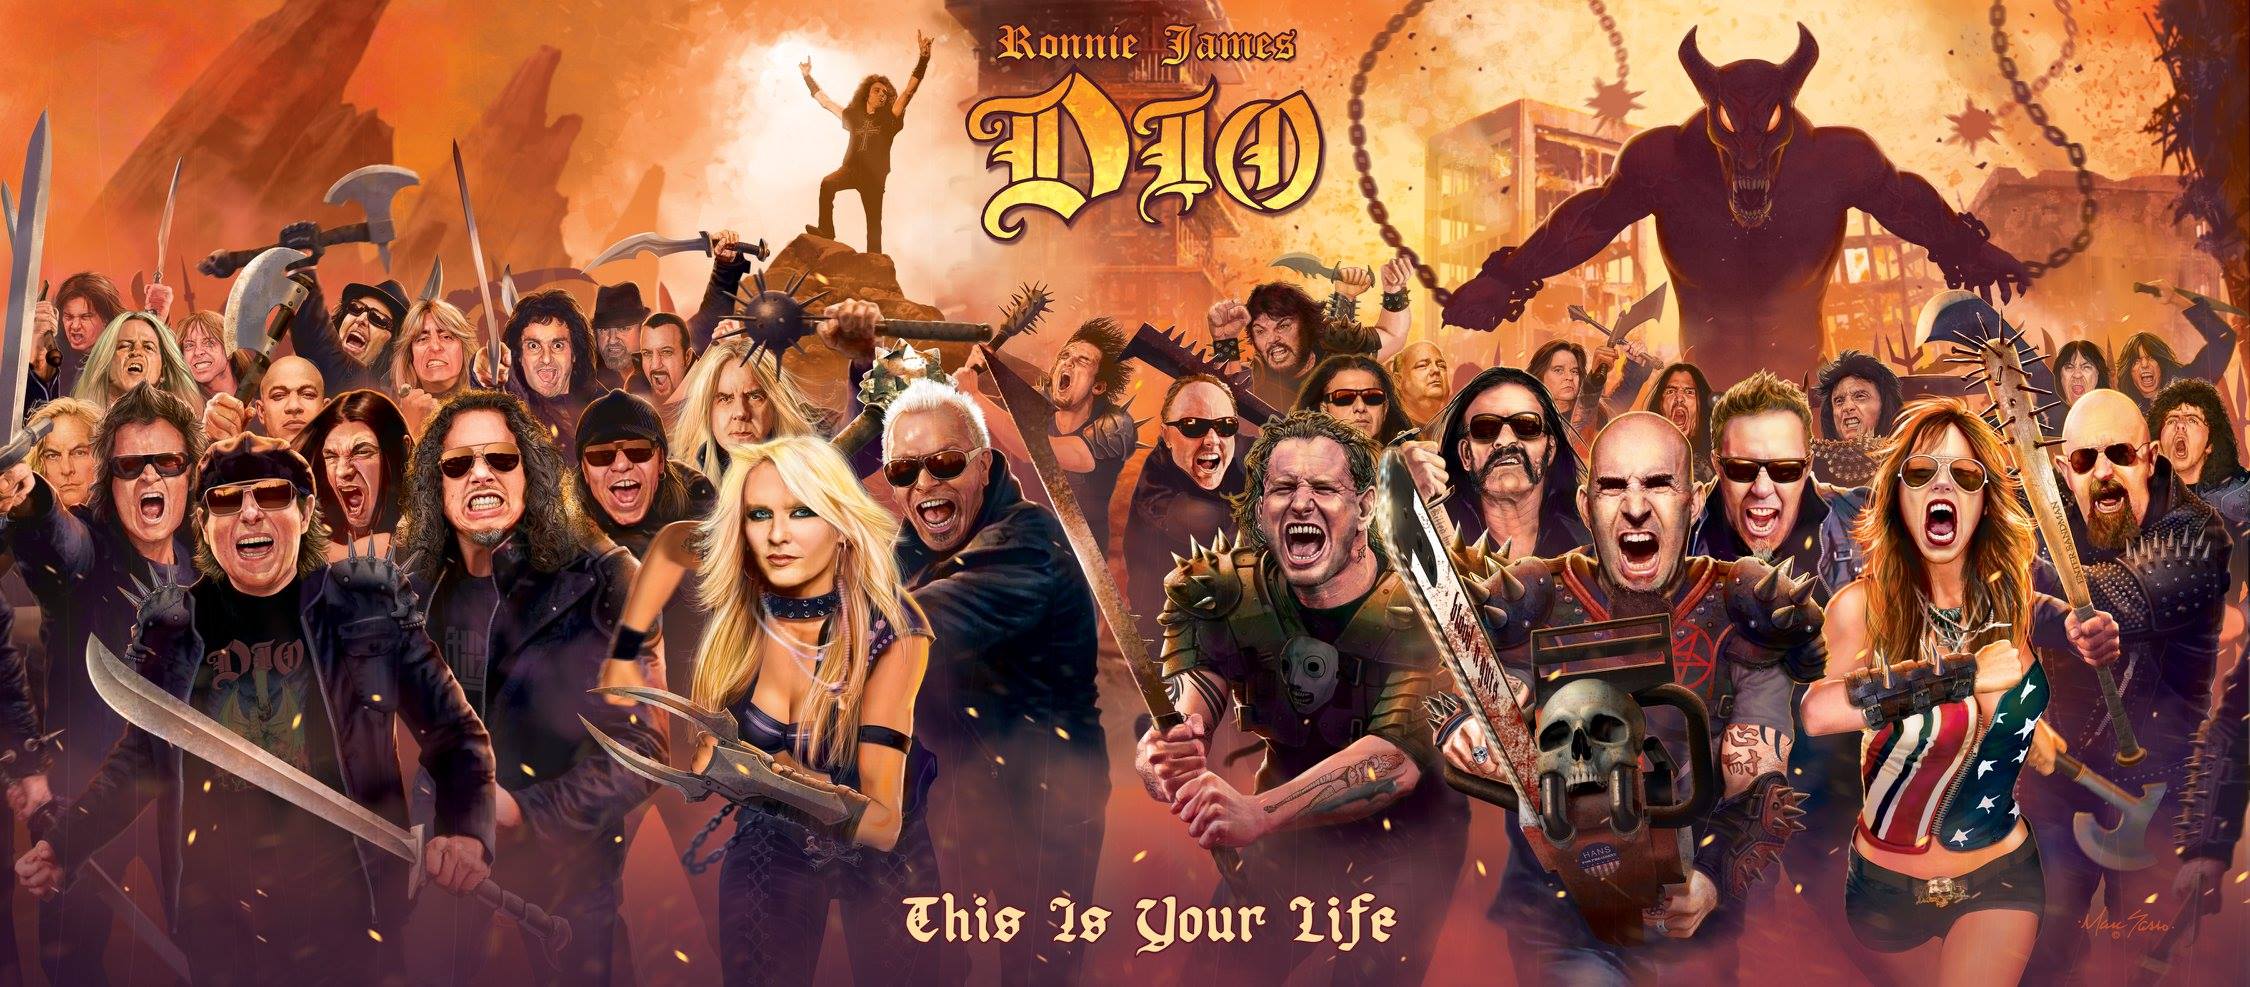 ronnie-james-dio-this-is-your-life